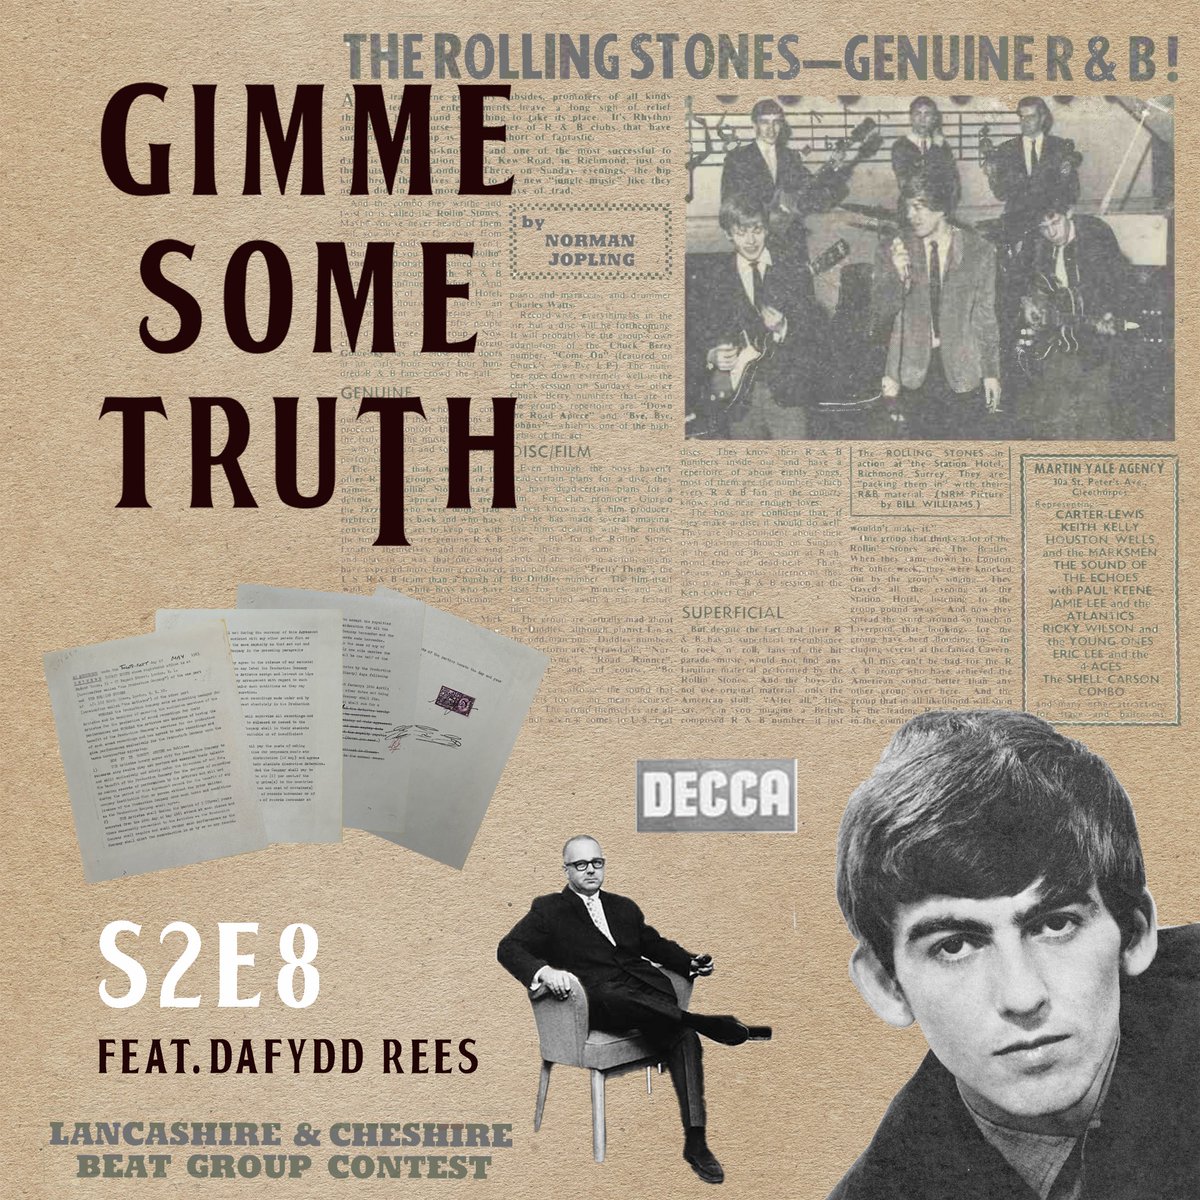 Season 2 finale! Forget what you think you know about how George Harrison helped to sign The Rolling Stones to Decca Records in May 1963. I am joined again by Dafydd Rees @1963_Beatles to discuss our new research. @OmnibusPress gimmesometruth.podbean.com/page/2/ #Beatles #TheBeatles